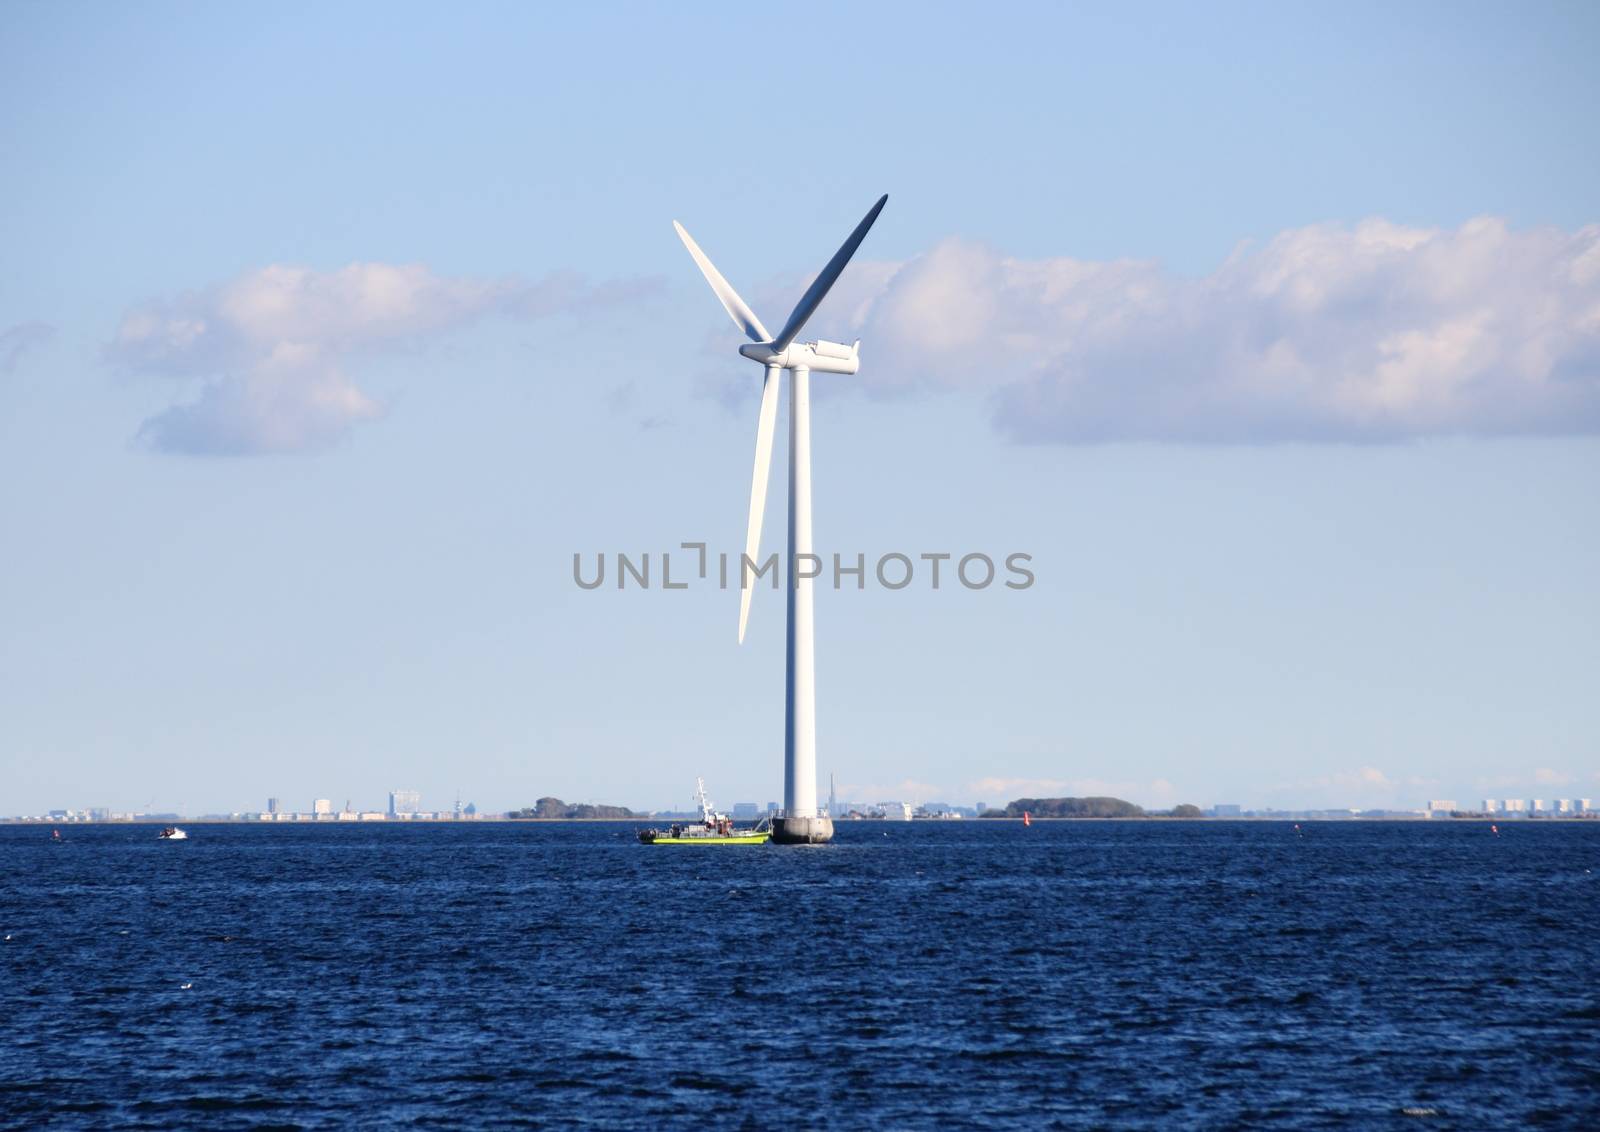 Ocean windmill in rough sea with inspection ship by HoleInTheBox